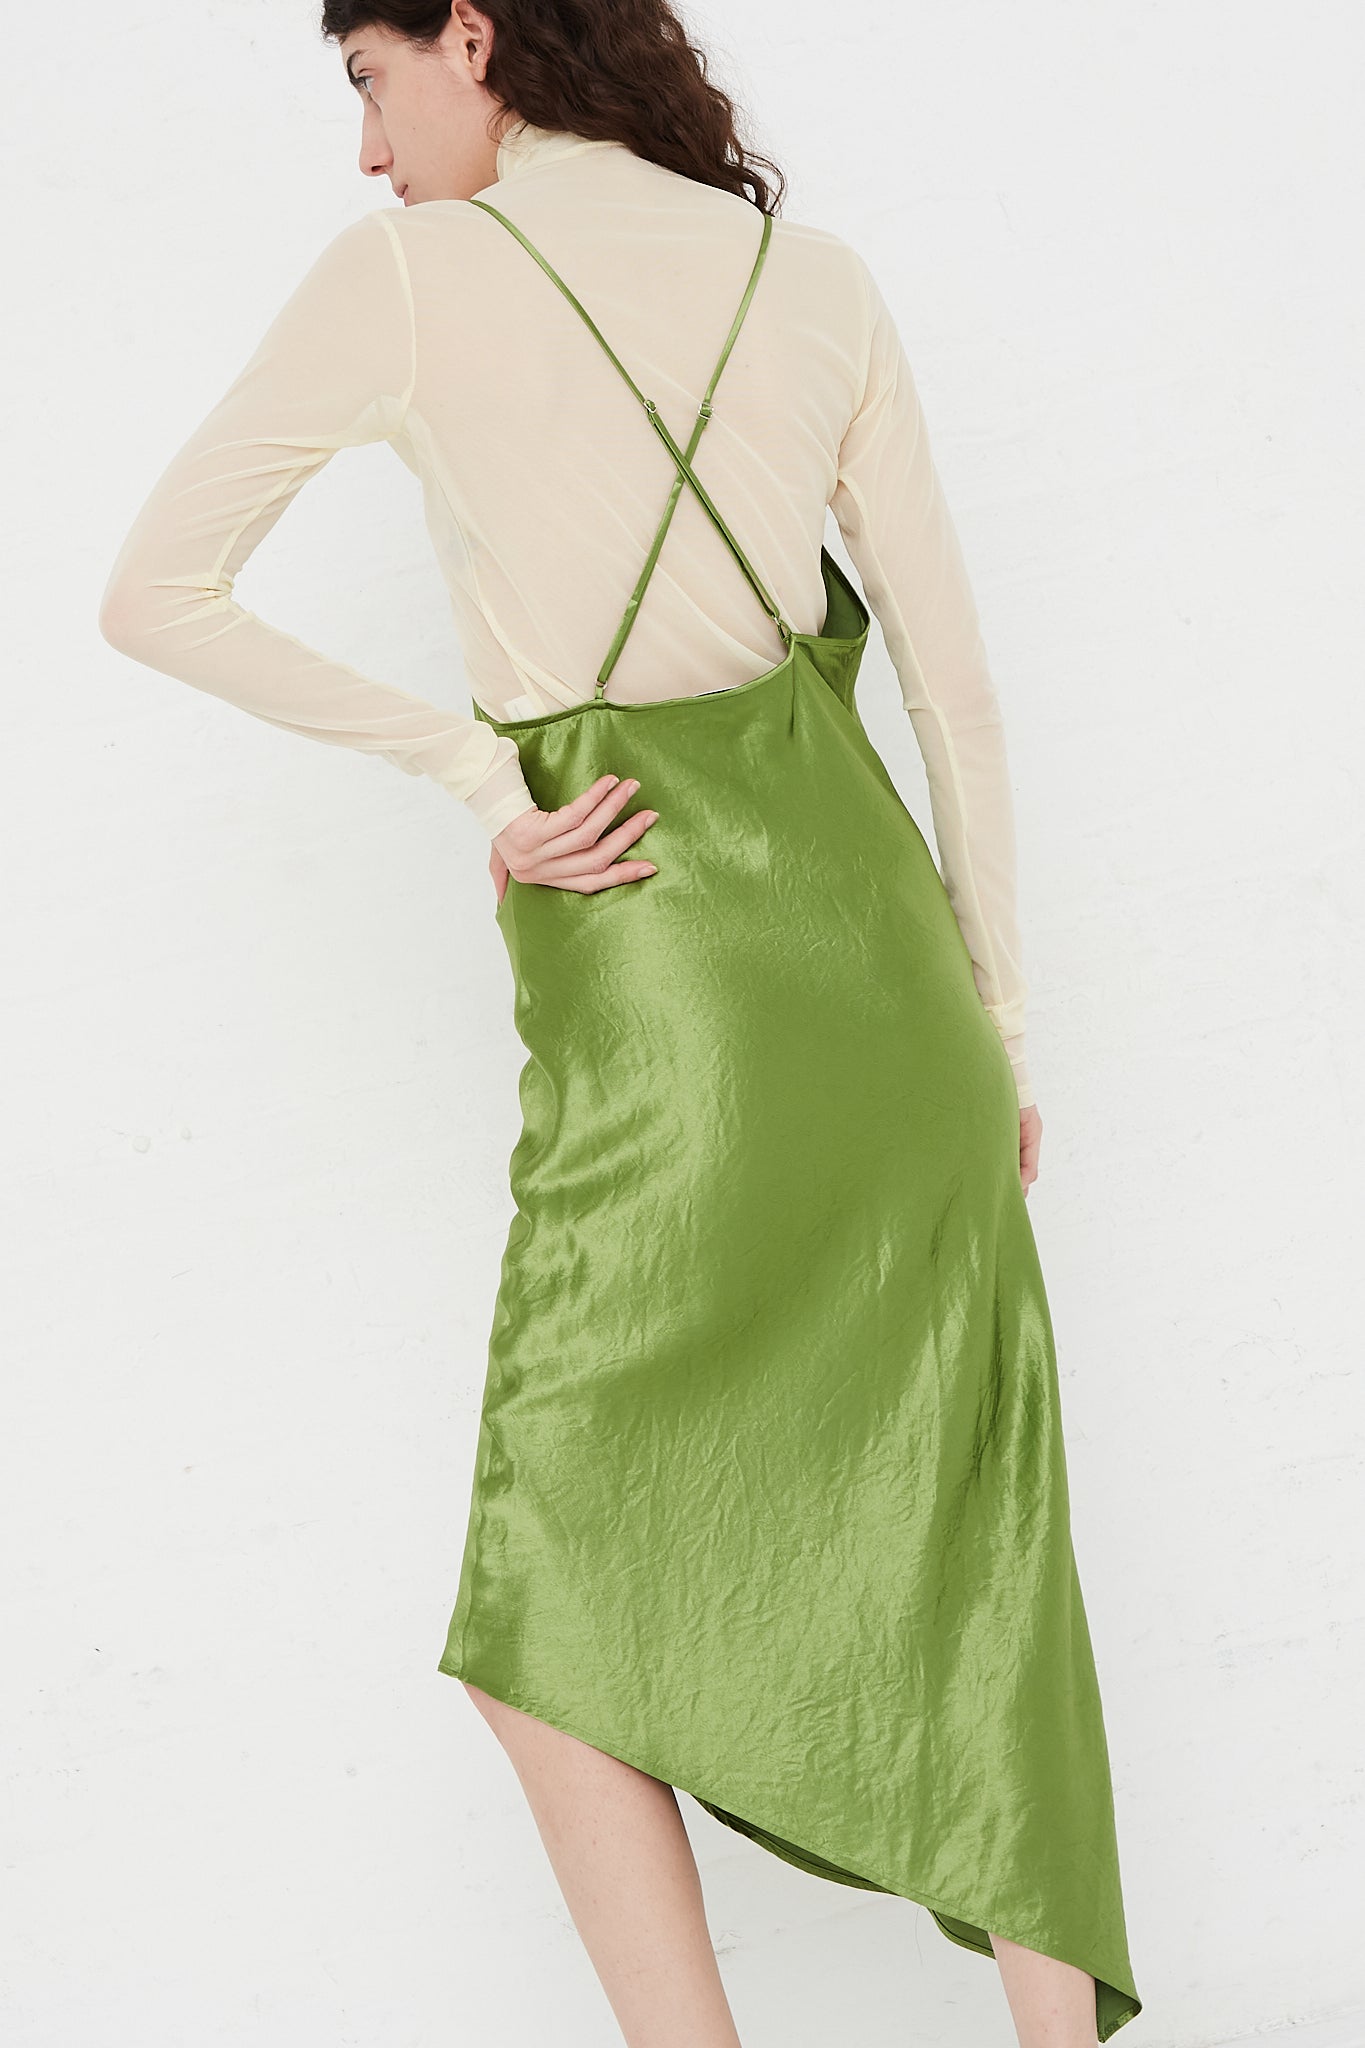 A model wearing a Vintage Washed Satin Halter Dress in Kiwi designed by Nomia brand.